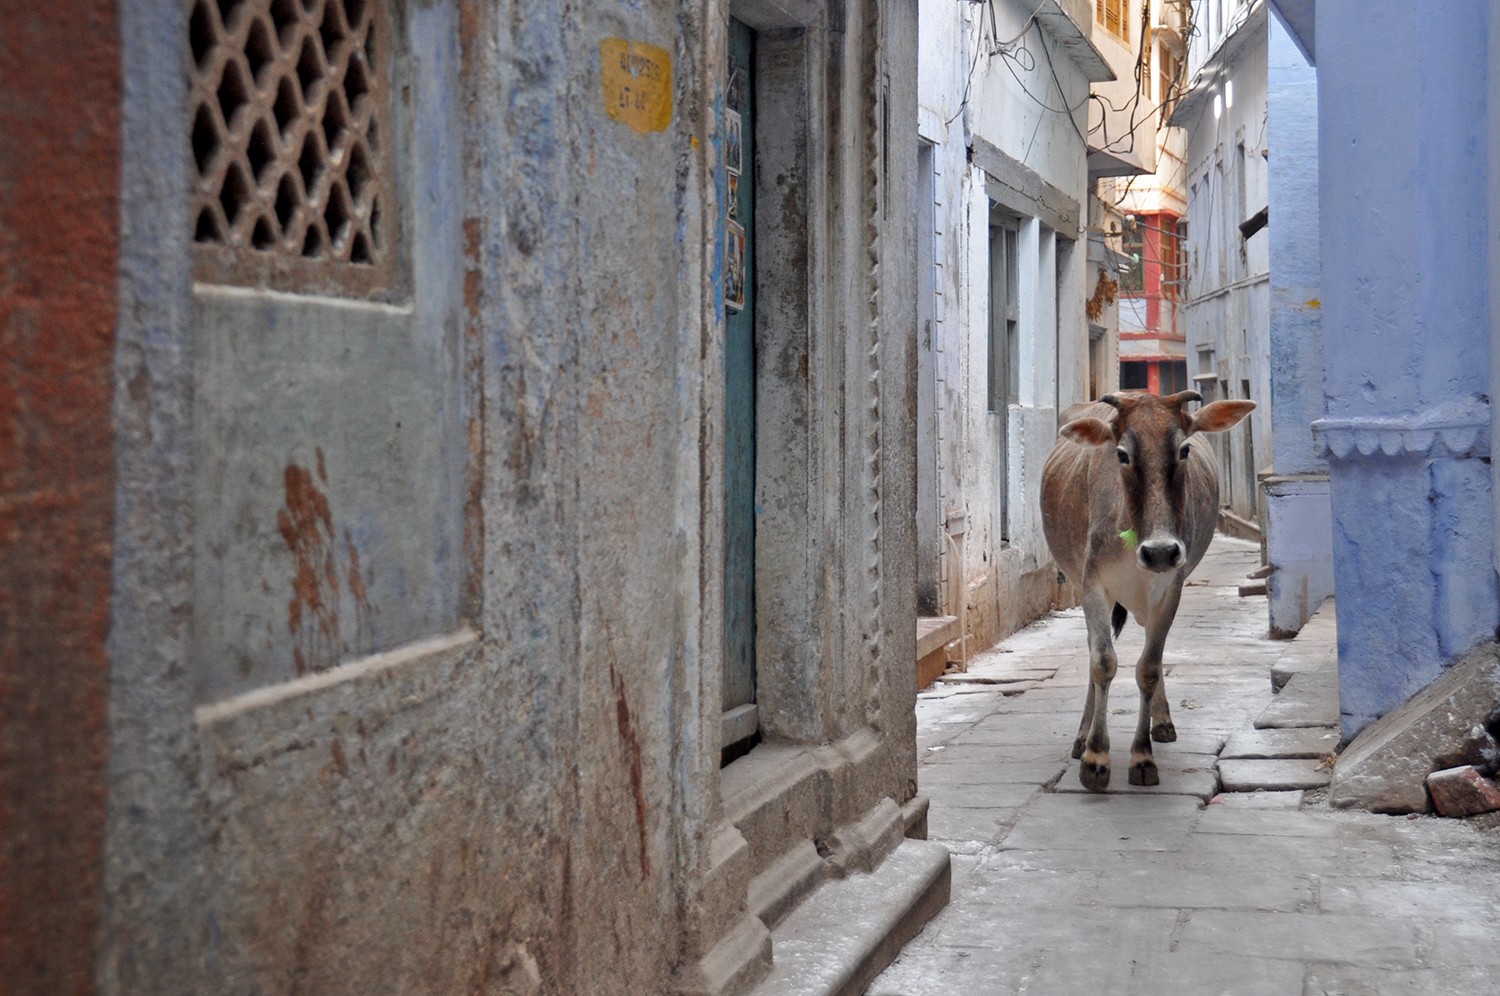 Cow in the street in India